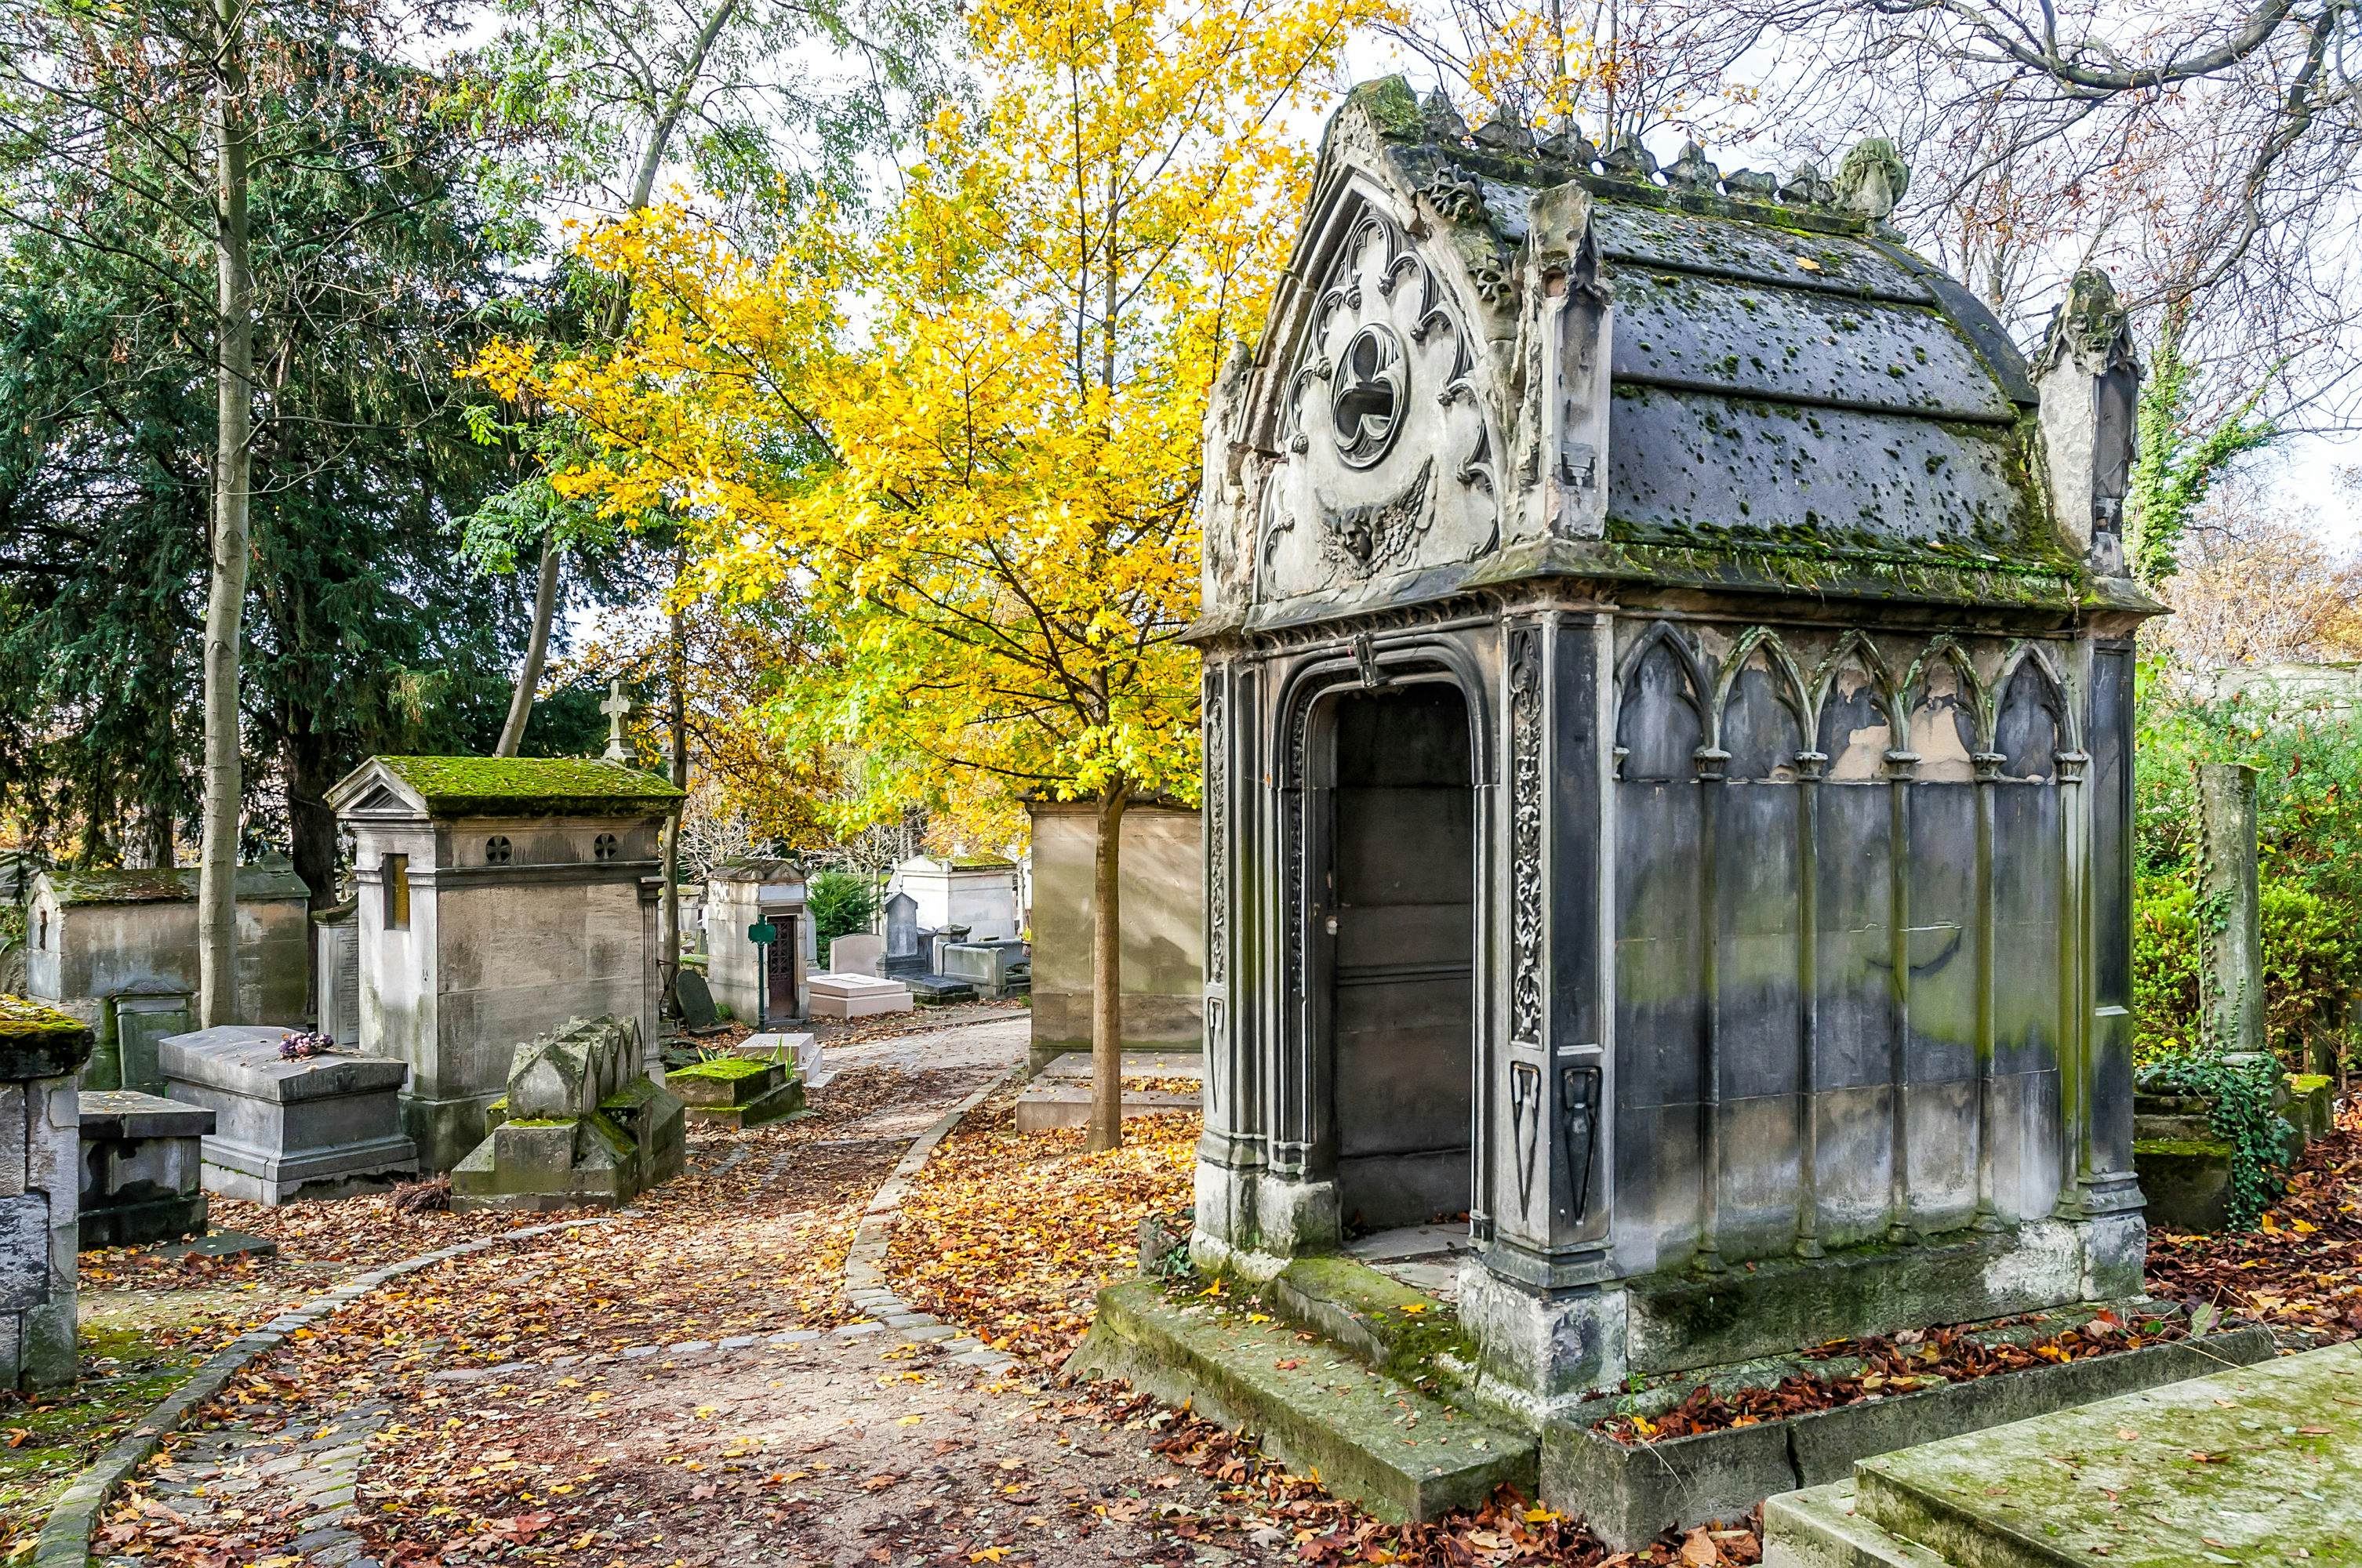 Top tips for visiting a cemetery responsibly - Lonely Planet